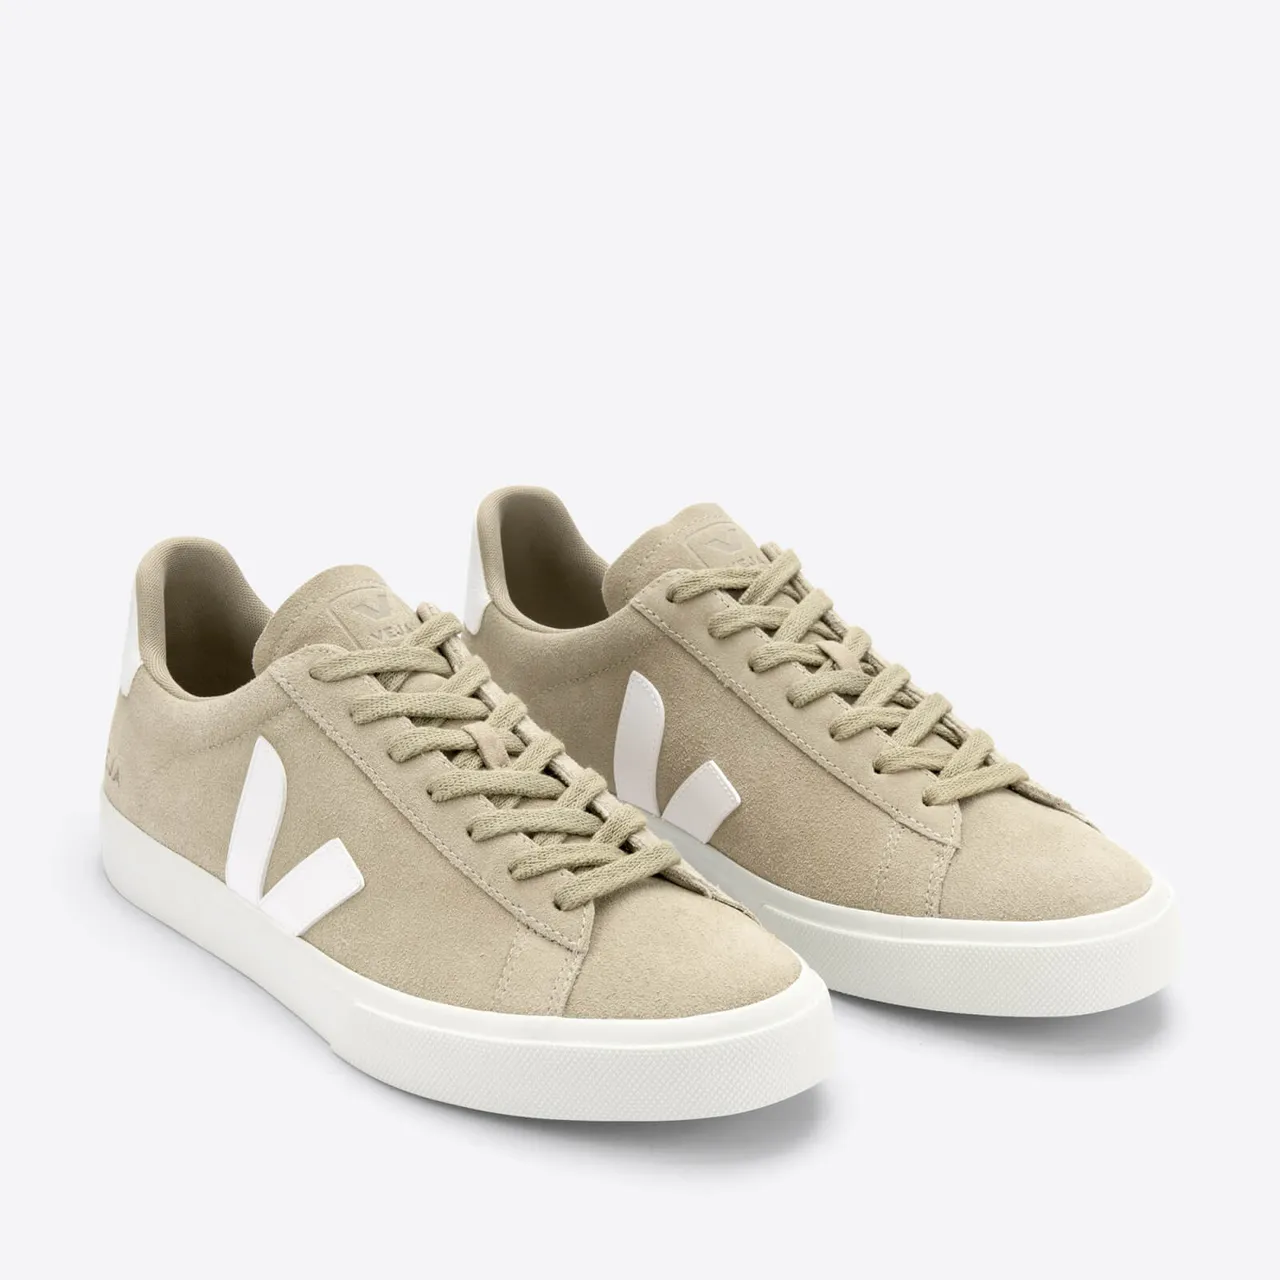 Veja Campo Leather-Trimmed Suede Trainers